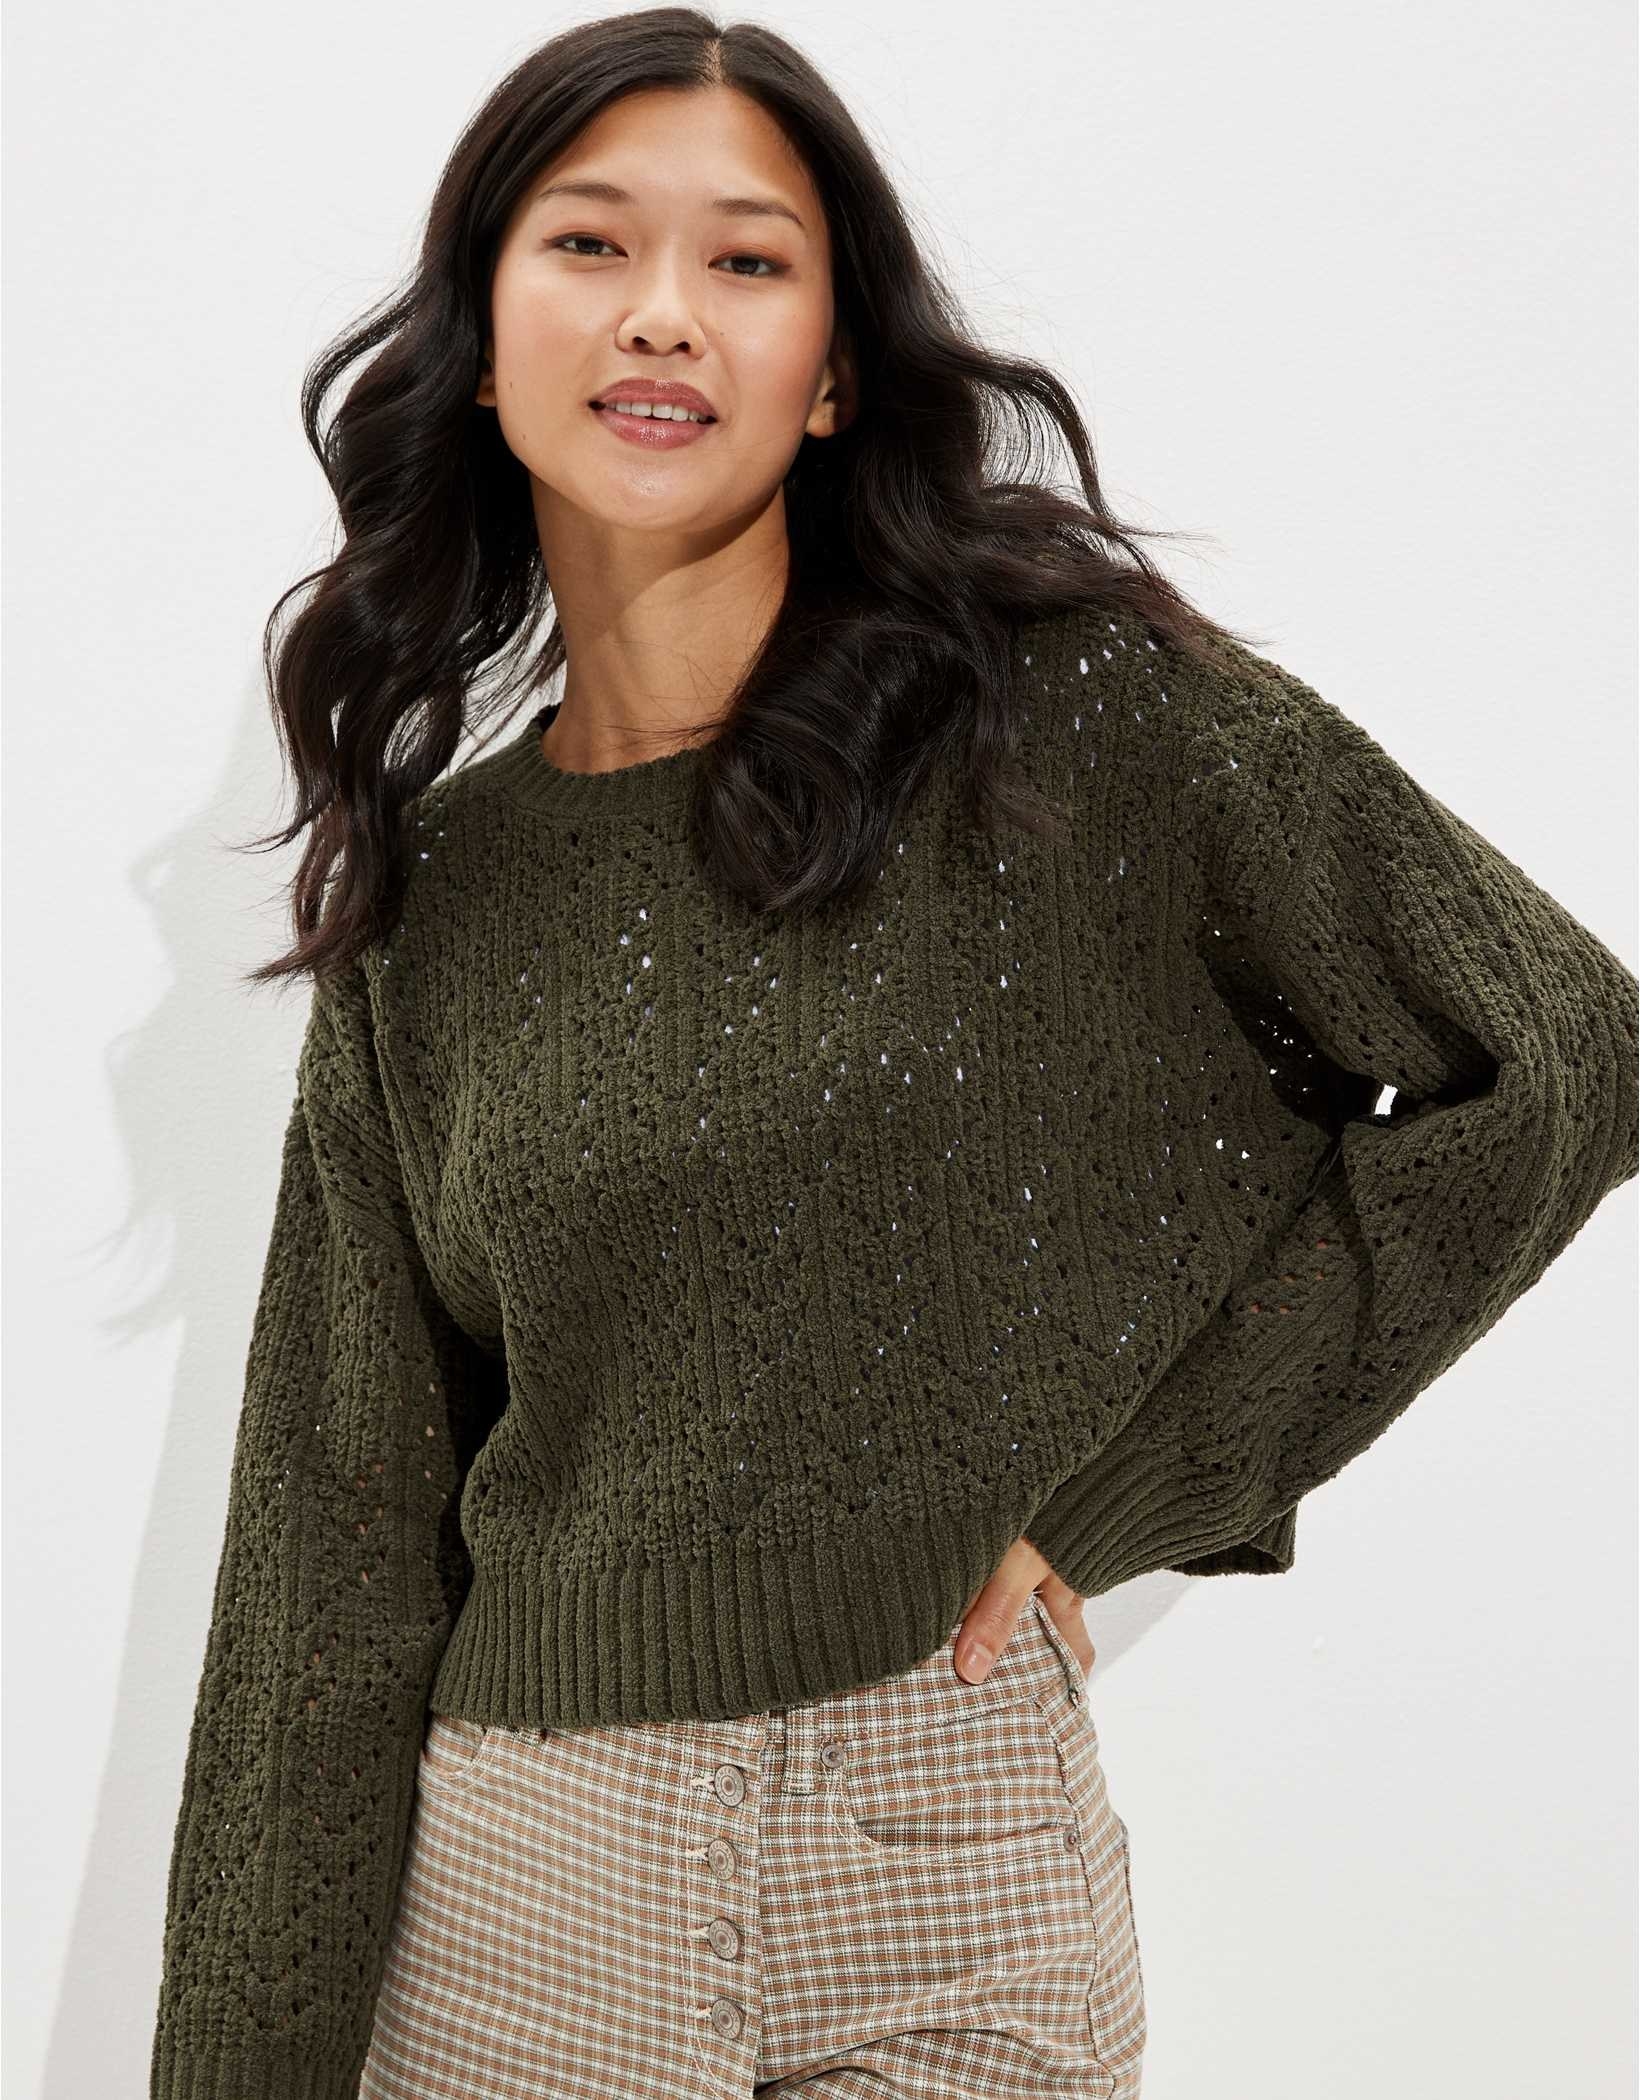 A model wearing an olive pointelle crew neck sweater